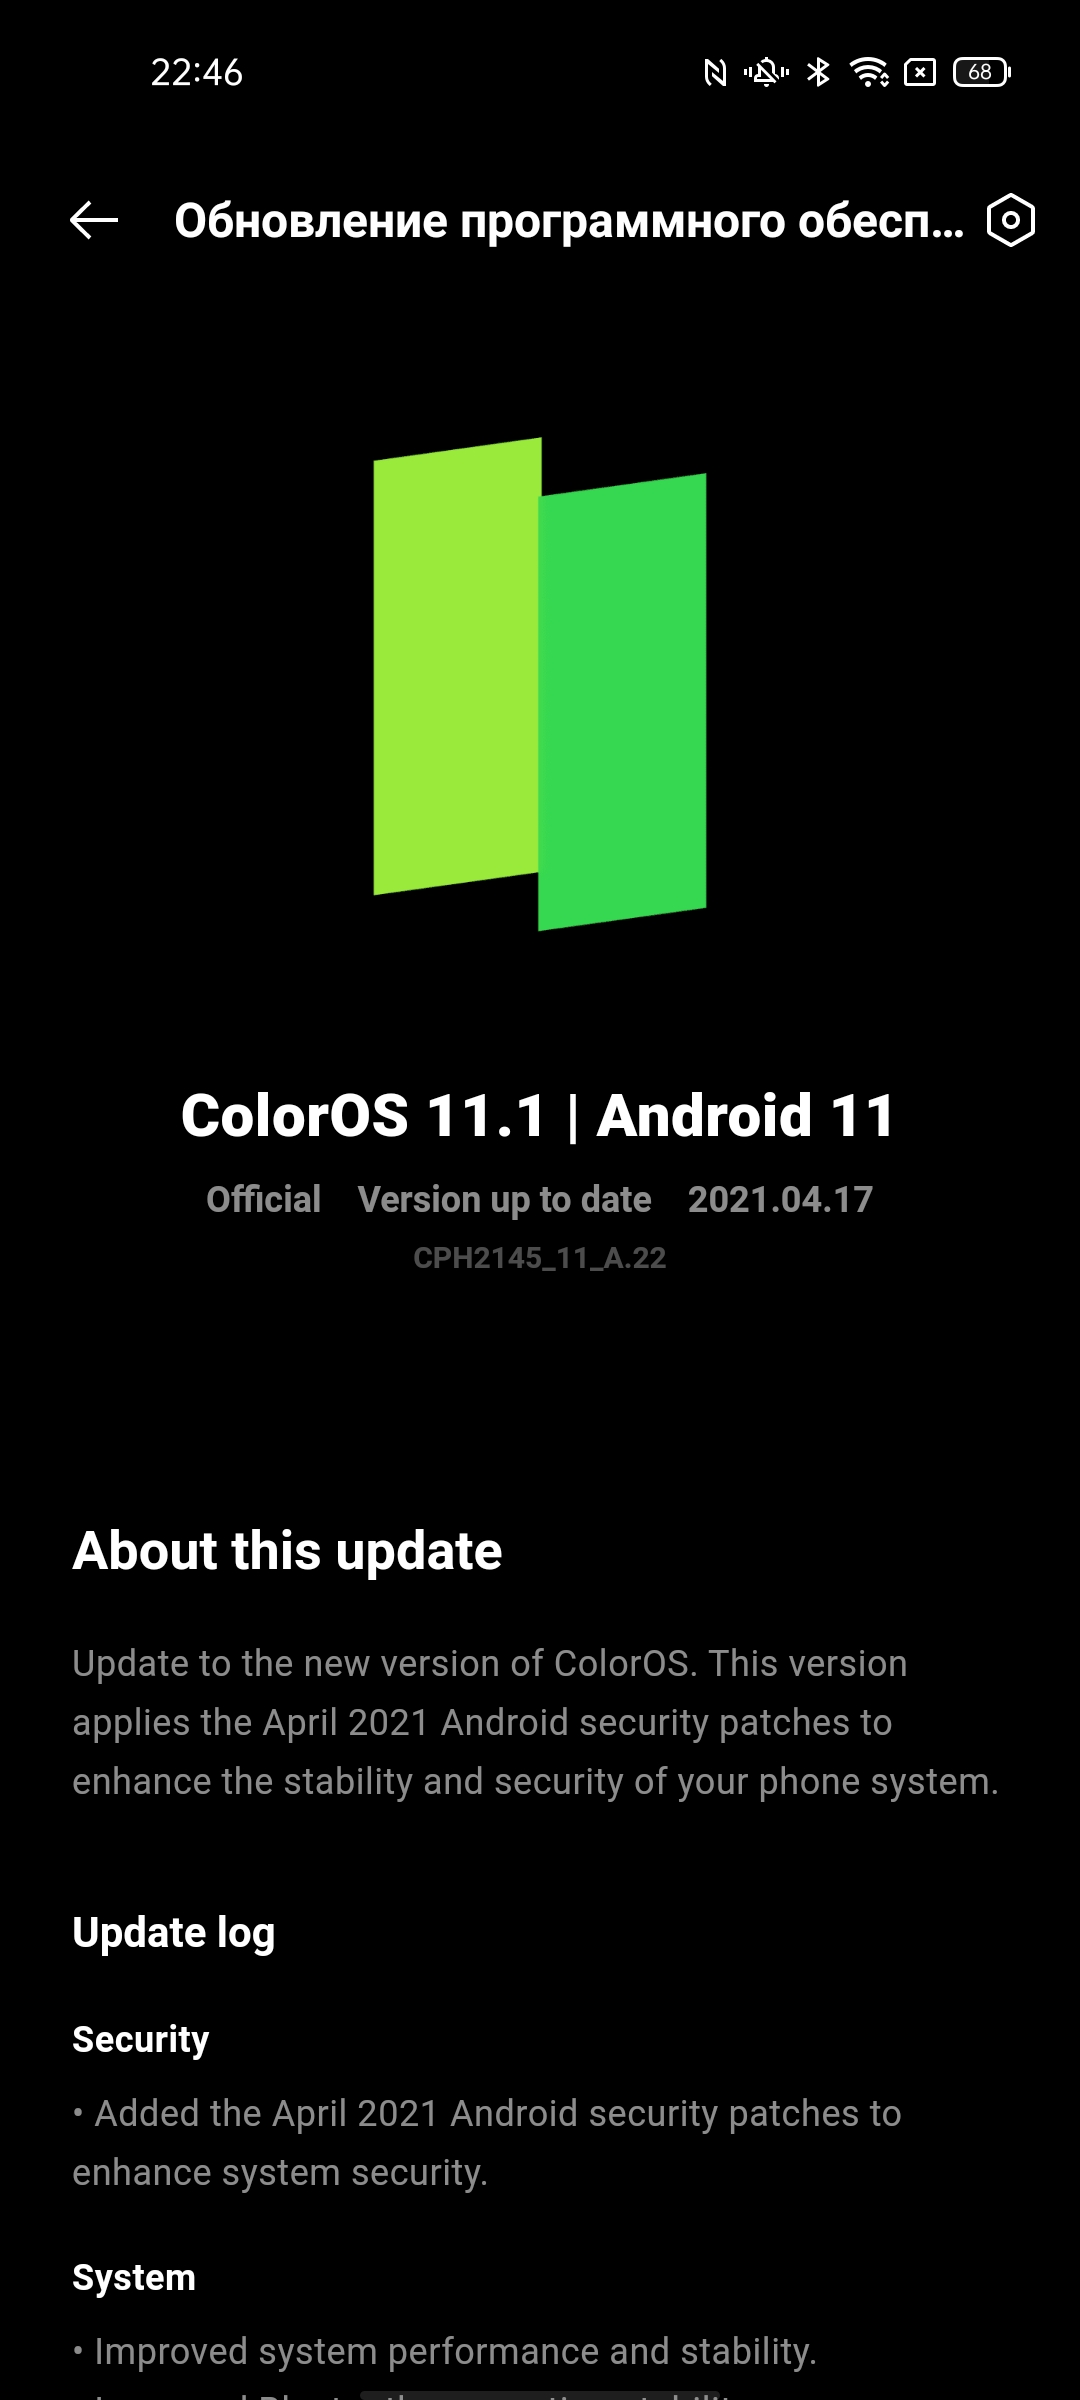 OPPO color os